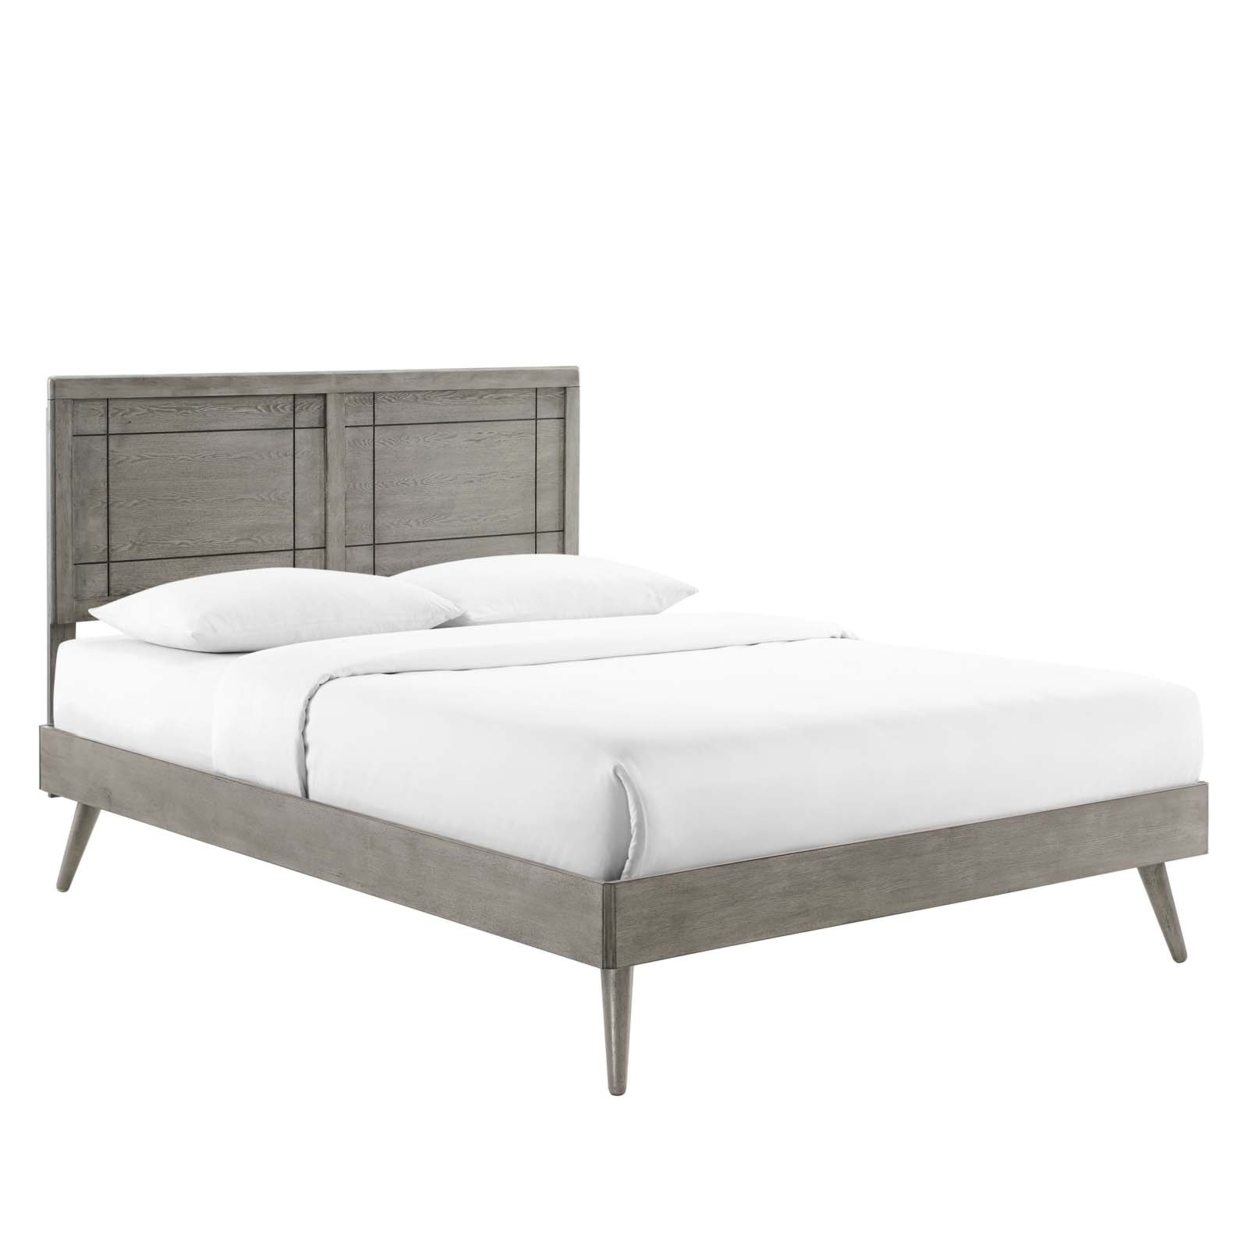 Marlee Full Wood Platform Bed With Splayed Legs, Gray